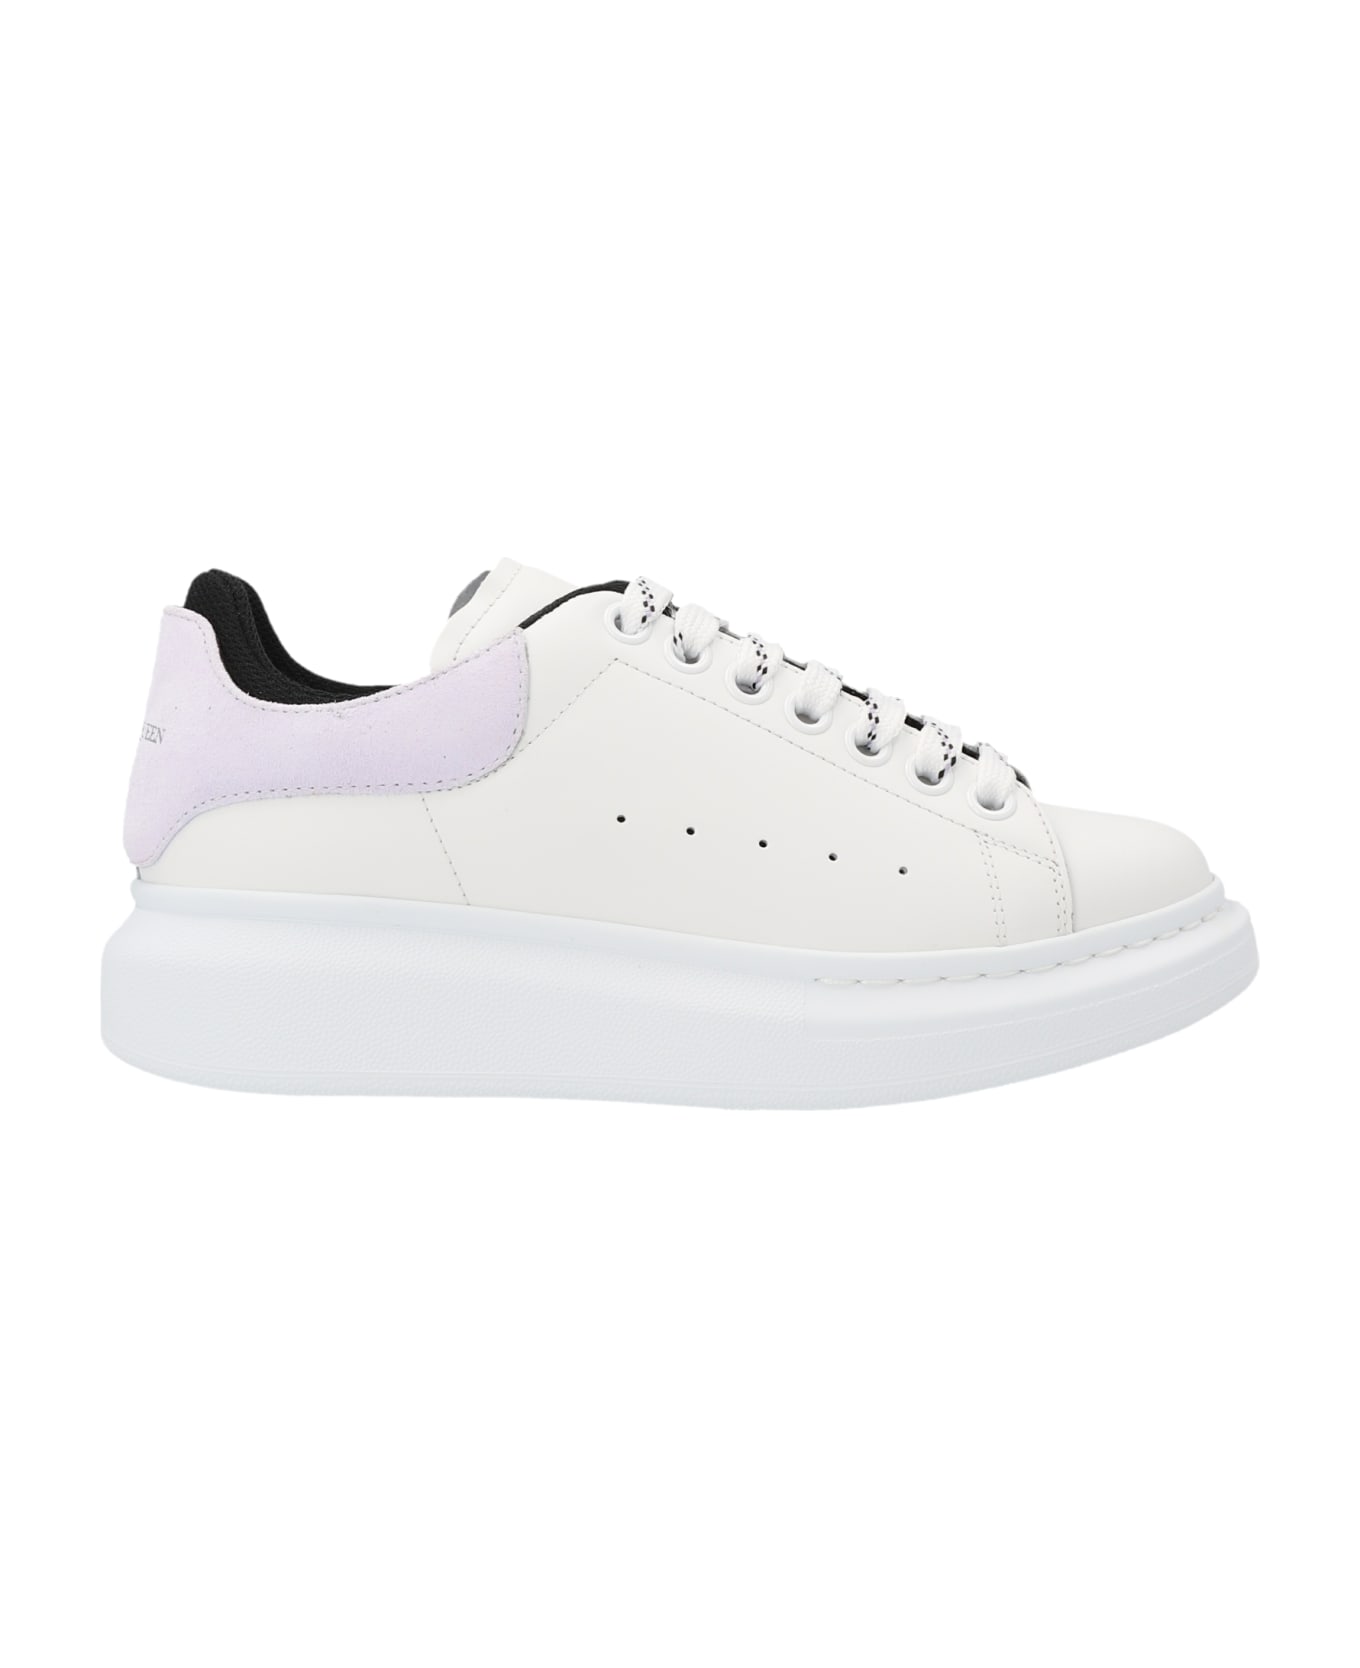 Alexander McQueen White, Black And Lilac Oversize Sneakers - Bianco